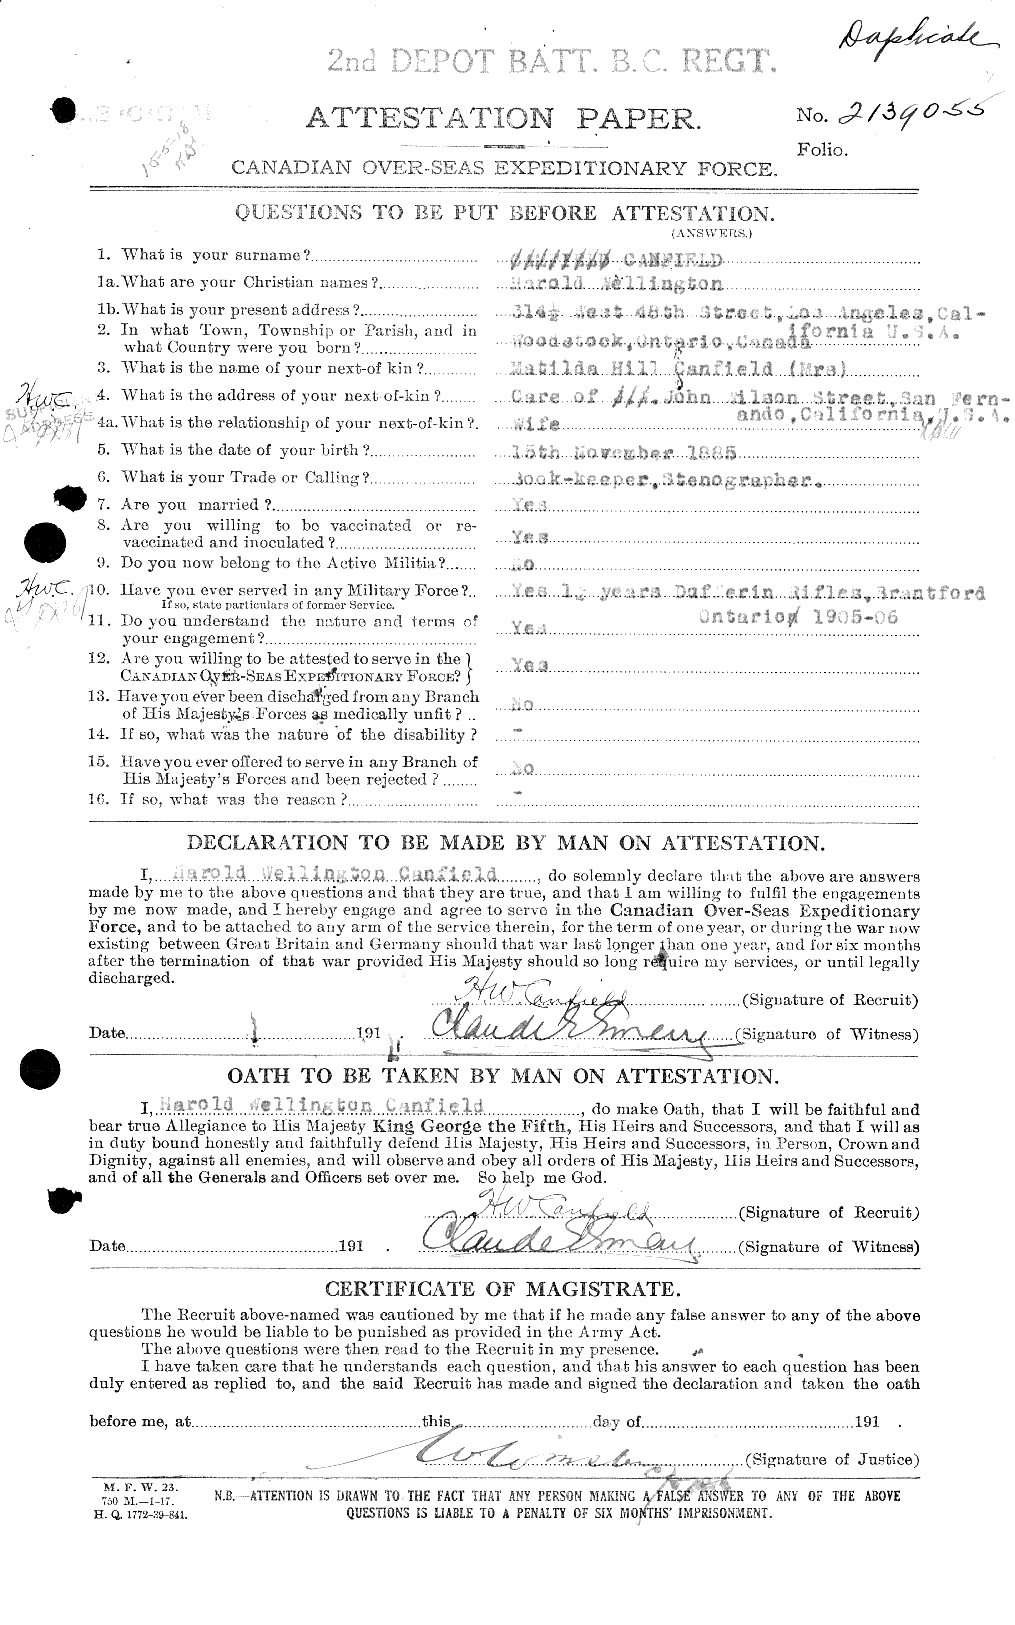 Personnel Records of the First World War - CEF 002837a